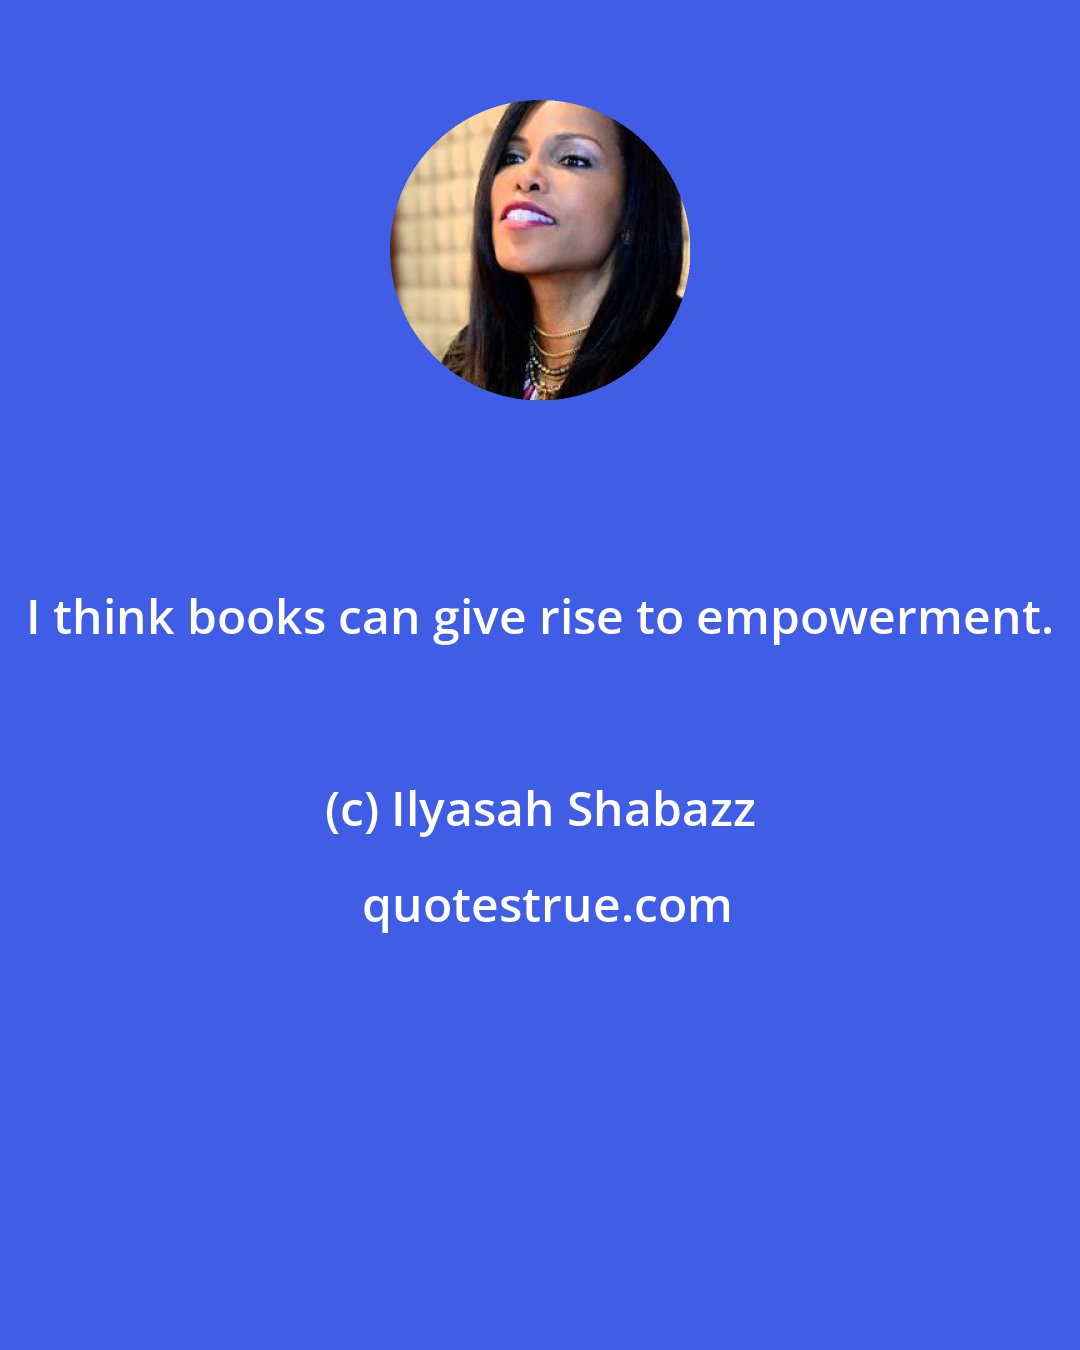 Ilyasah Shabazz: I think books can give rise to empowerment.